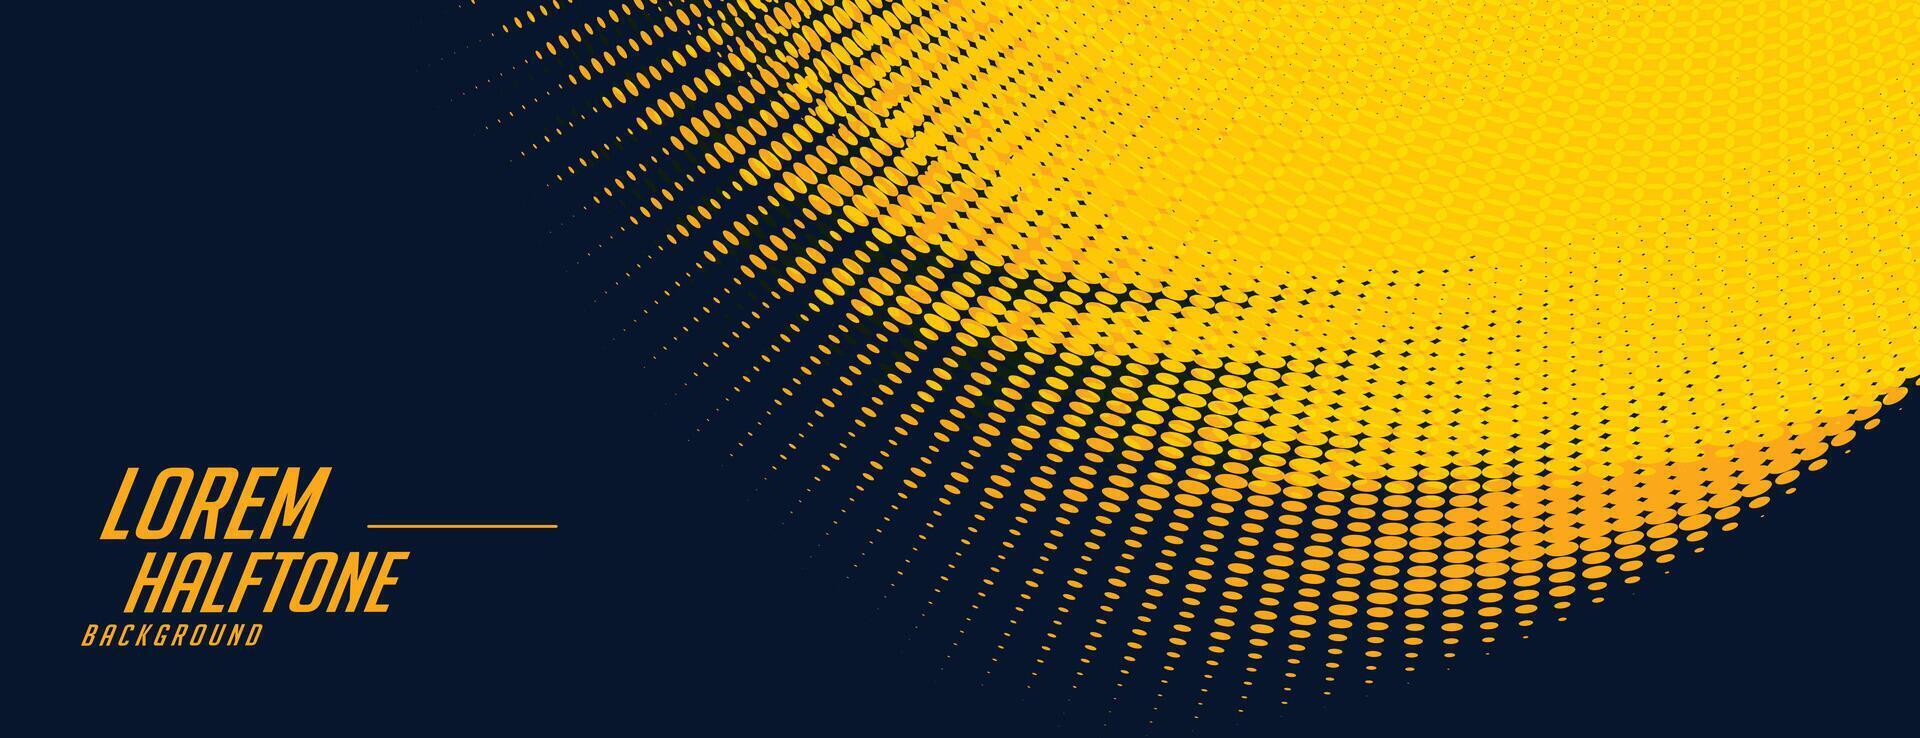 abstract yellow halftone banner on black background vector